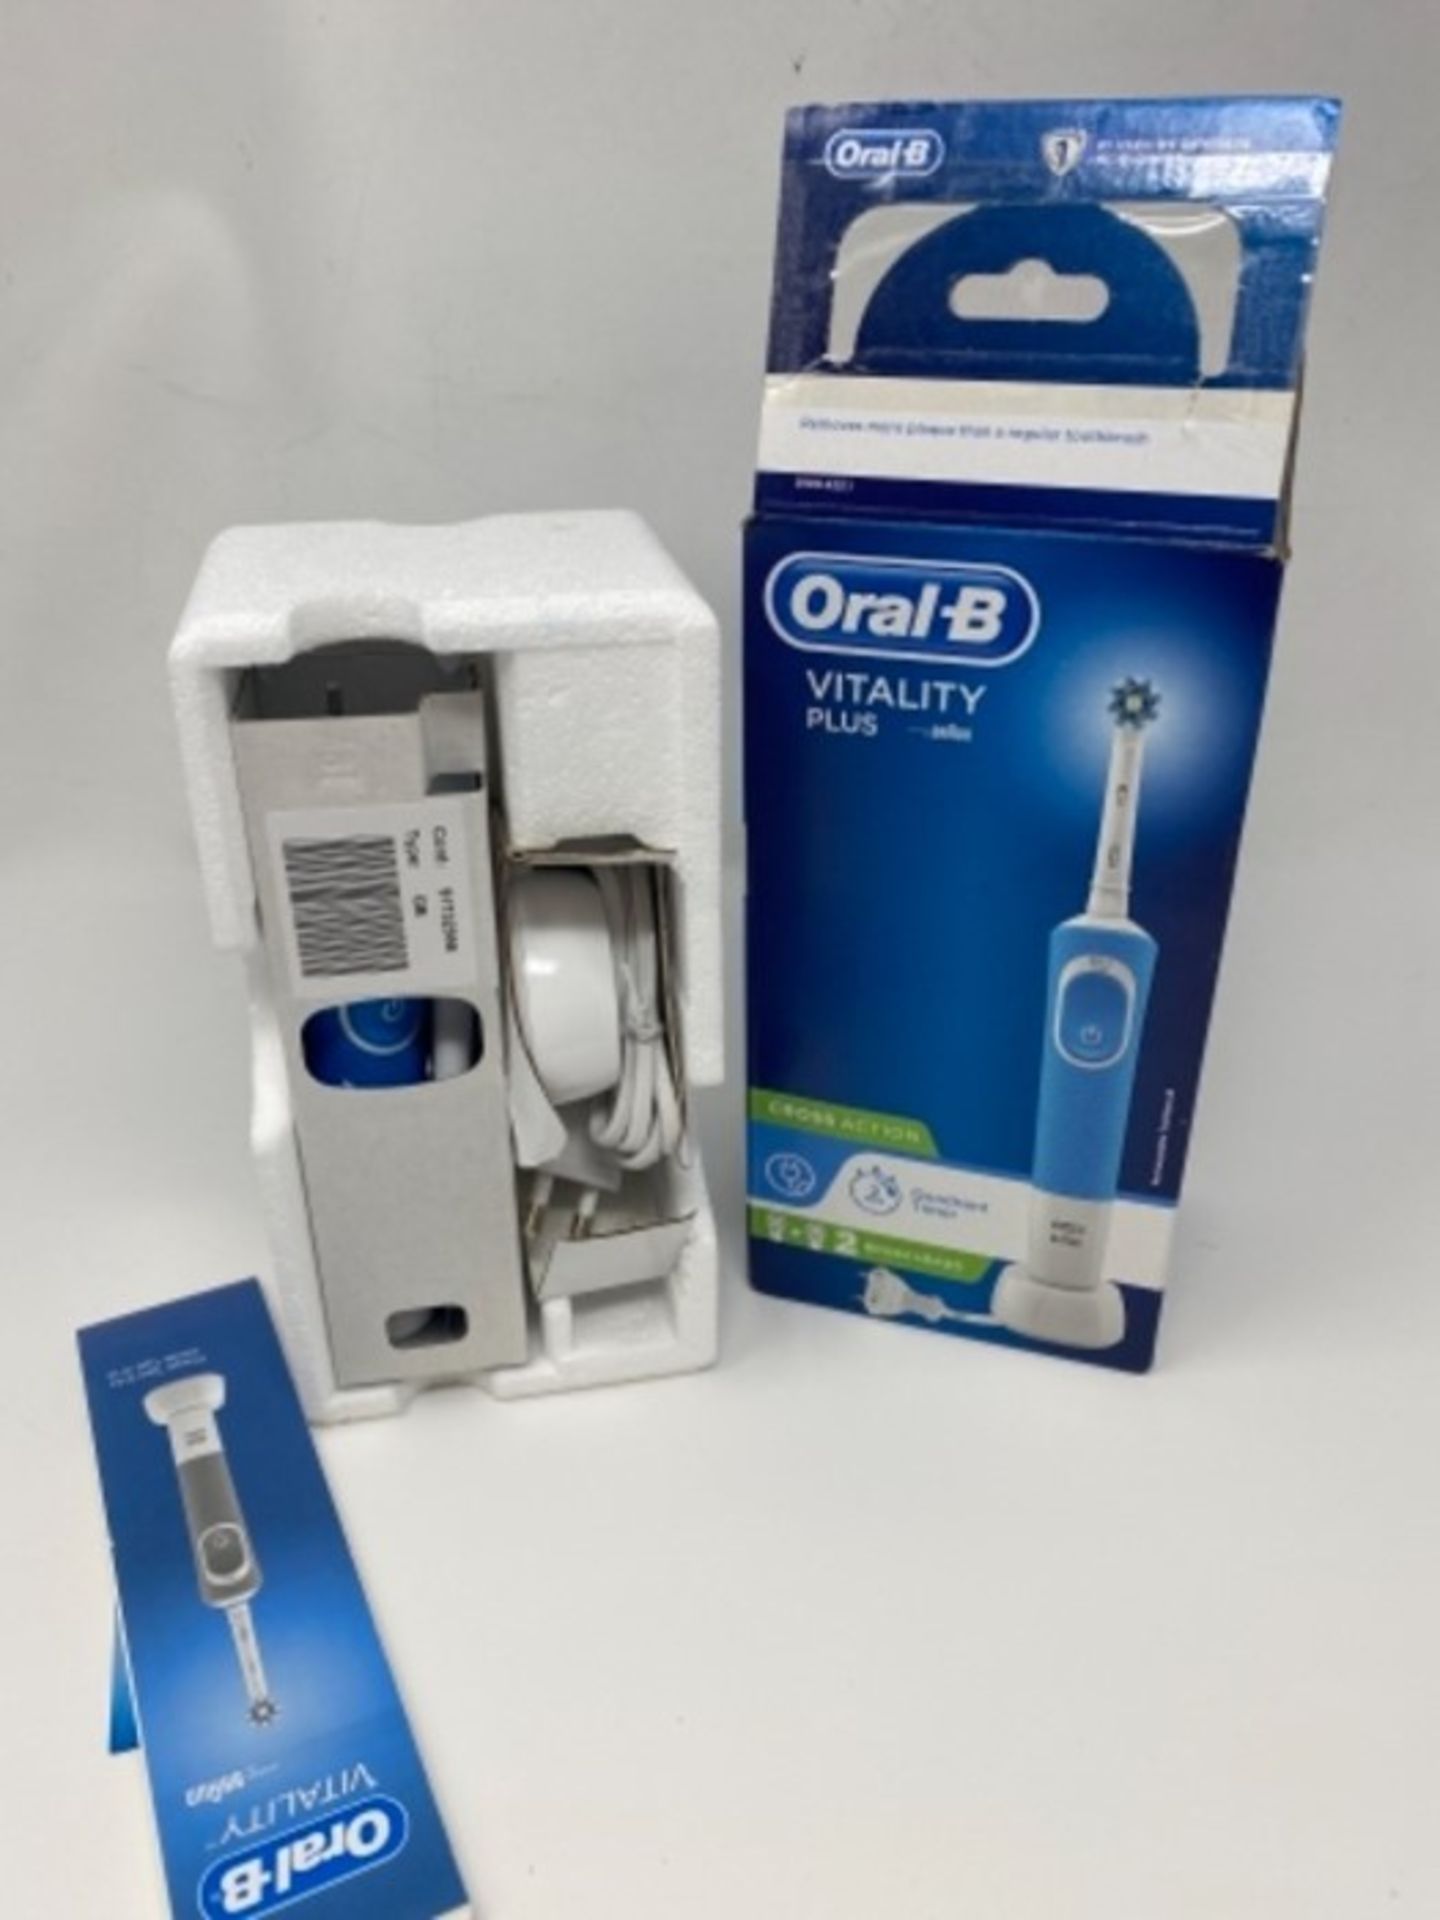 Oral-B Vitality Plus CrossAction Electric Rechar - Image 2 of 2